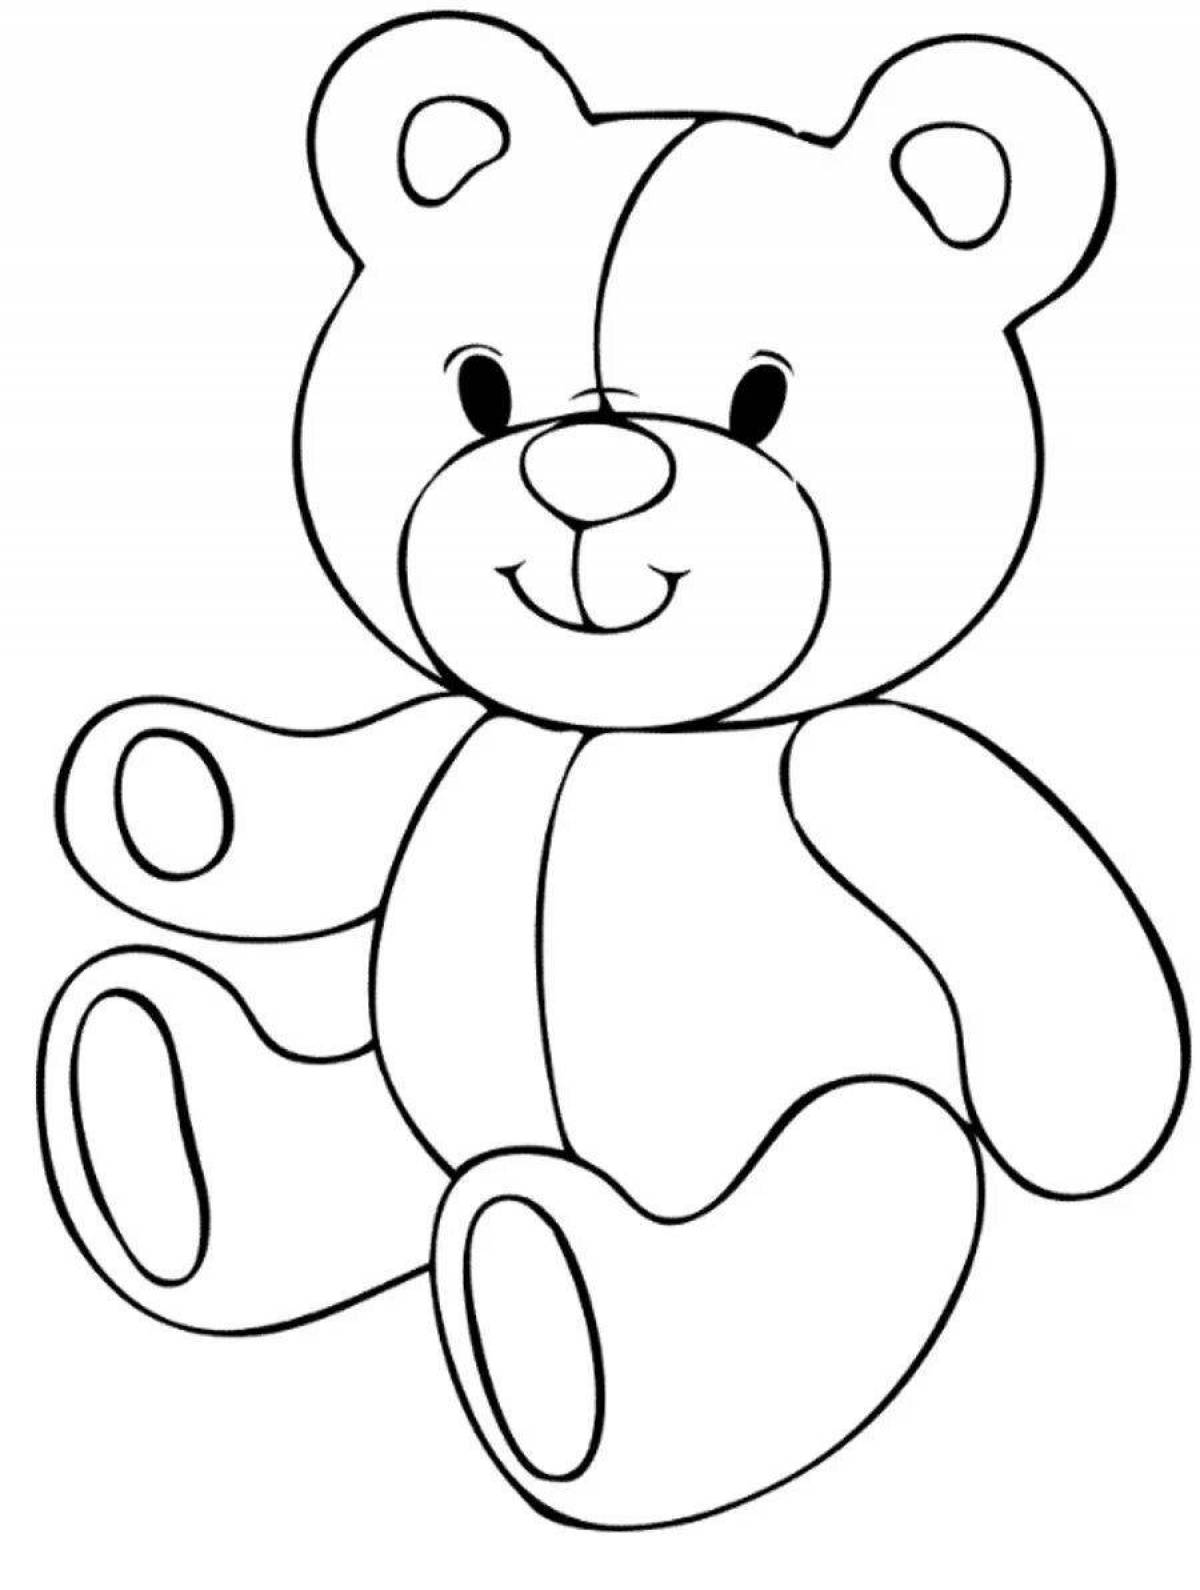 Incredible teddy bear coloring book for 2-3 year olds